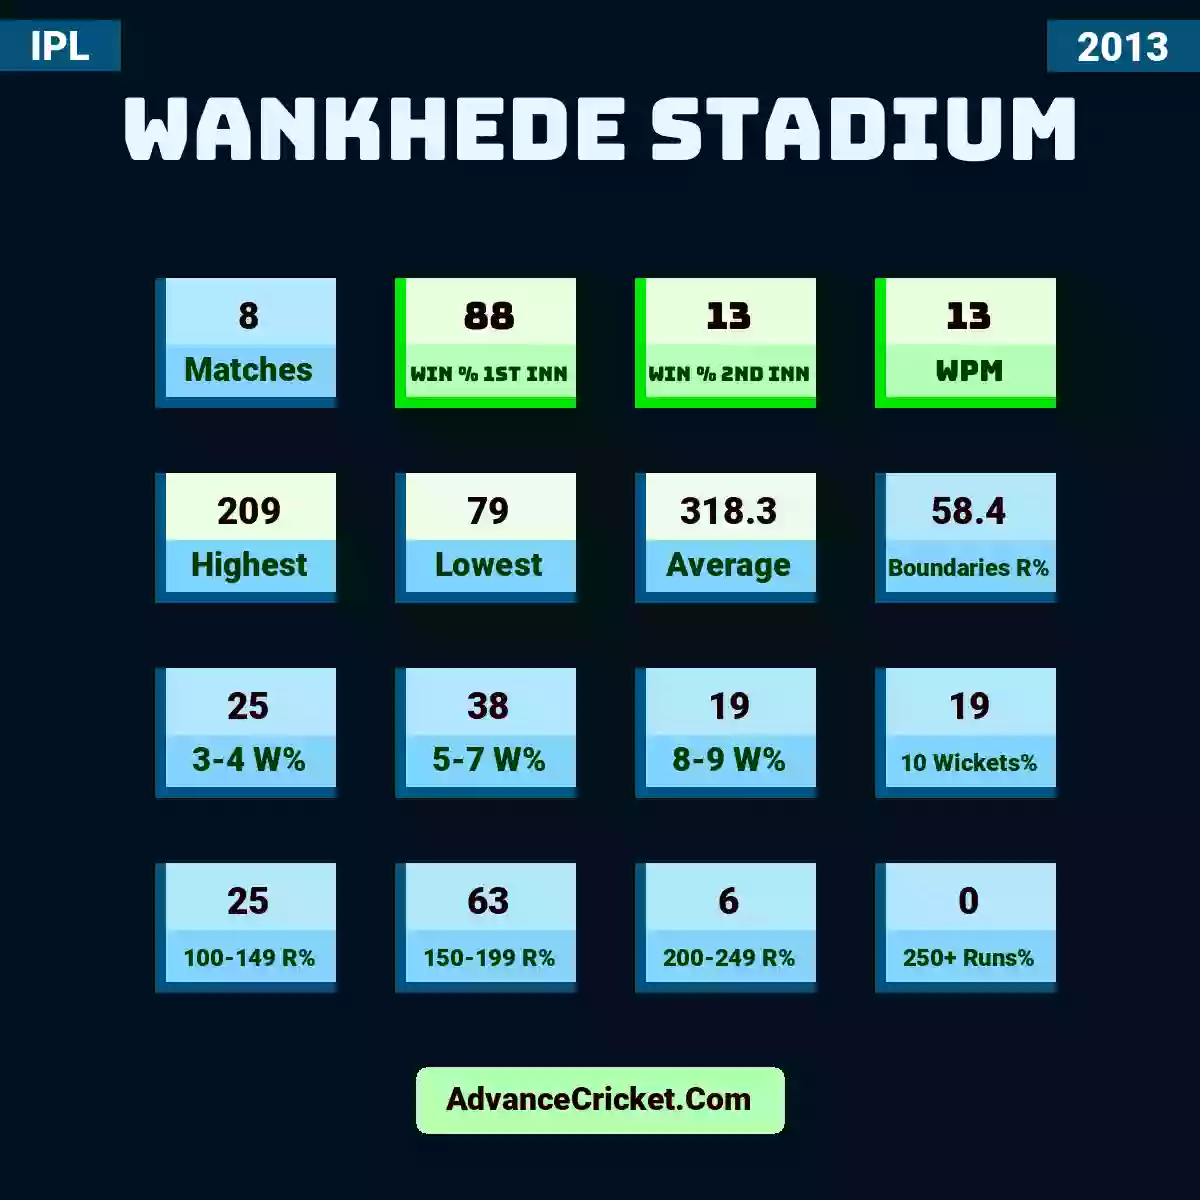 Image showing Wankhede Stadium with Matches: 8, Win % 1st Inn: 88, Win % 2nd Inn: 13, WPM: 13, Highest: 209, Lowest: 79, Average: 318.3, Boundaries R%: 58.4, 3-4 W%: 25, 5-7 W%: 38, 8-9 W%: 19, 10 Wickets%: 19, 100-149 R%: 25, 150-199 R%: 63, 200-249 R%: 6, 250+ Runs%: 0.